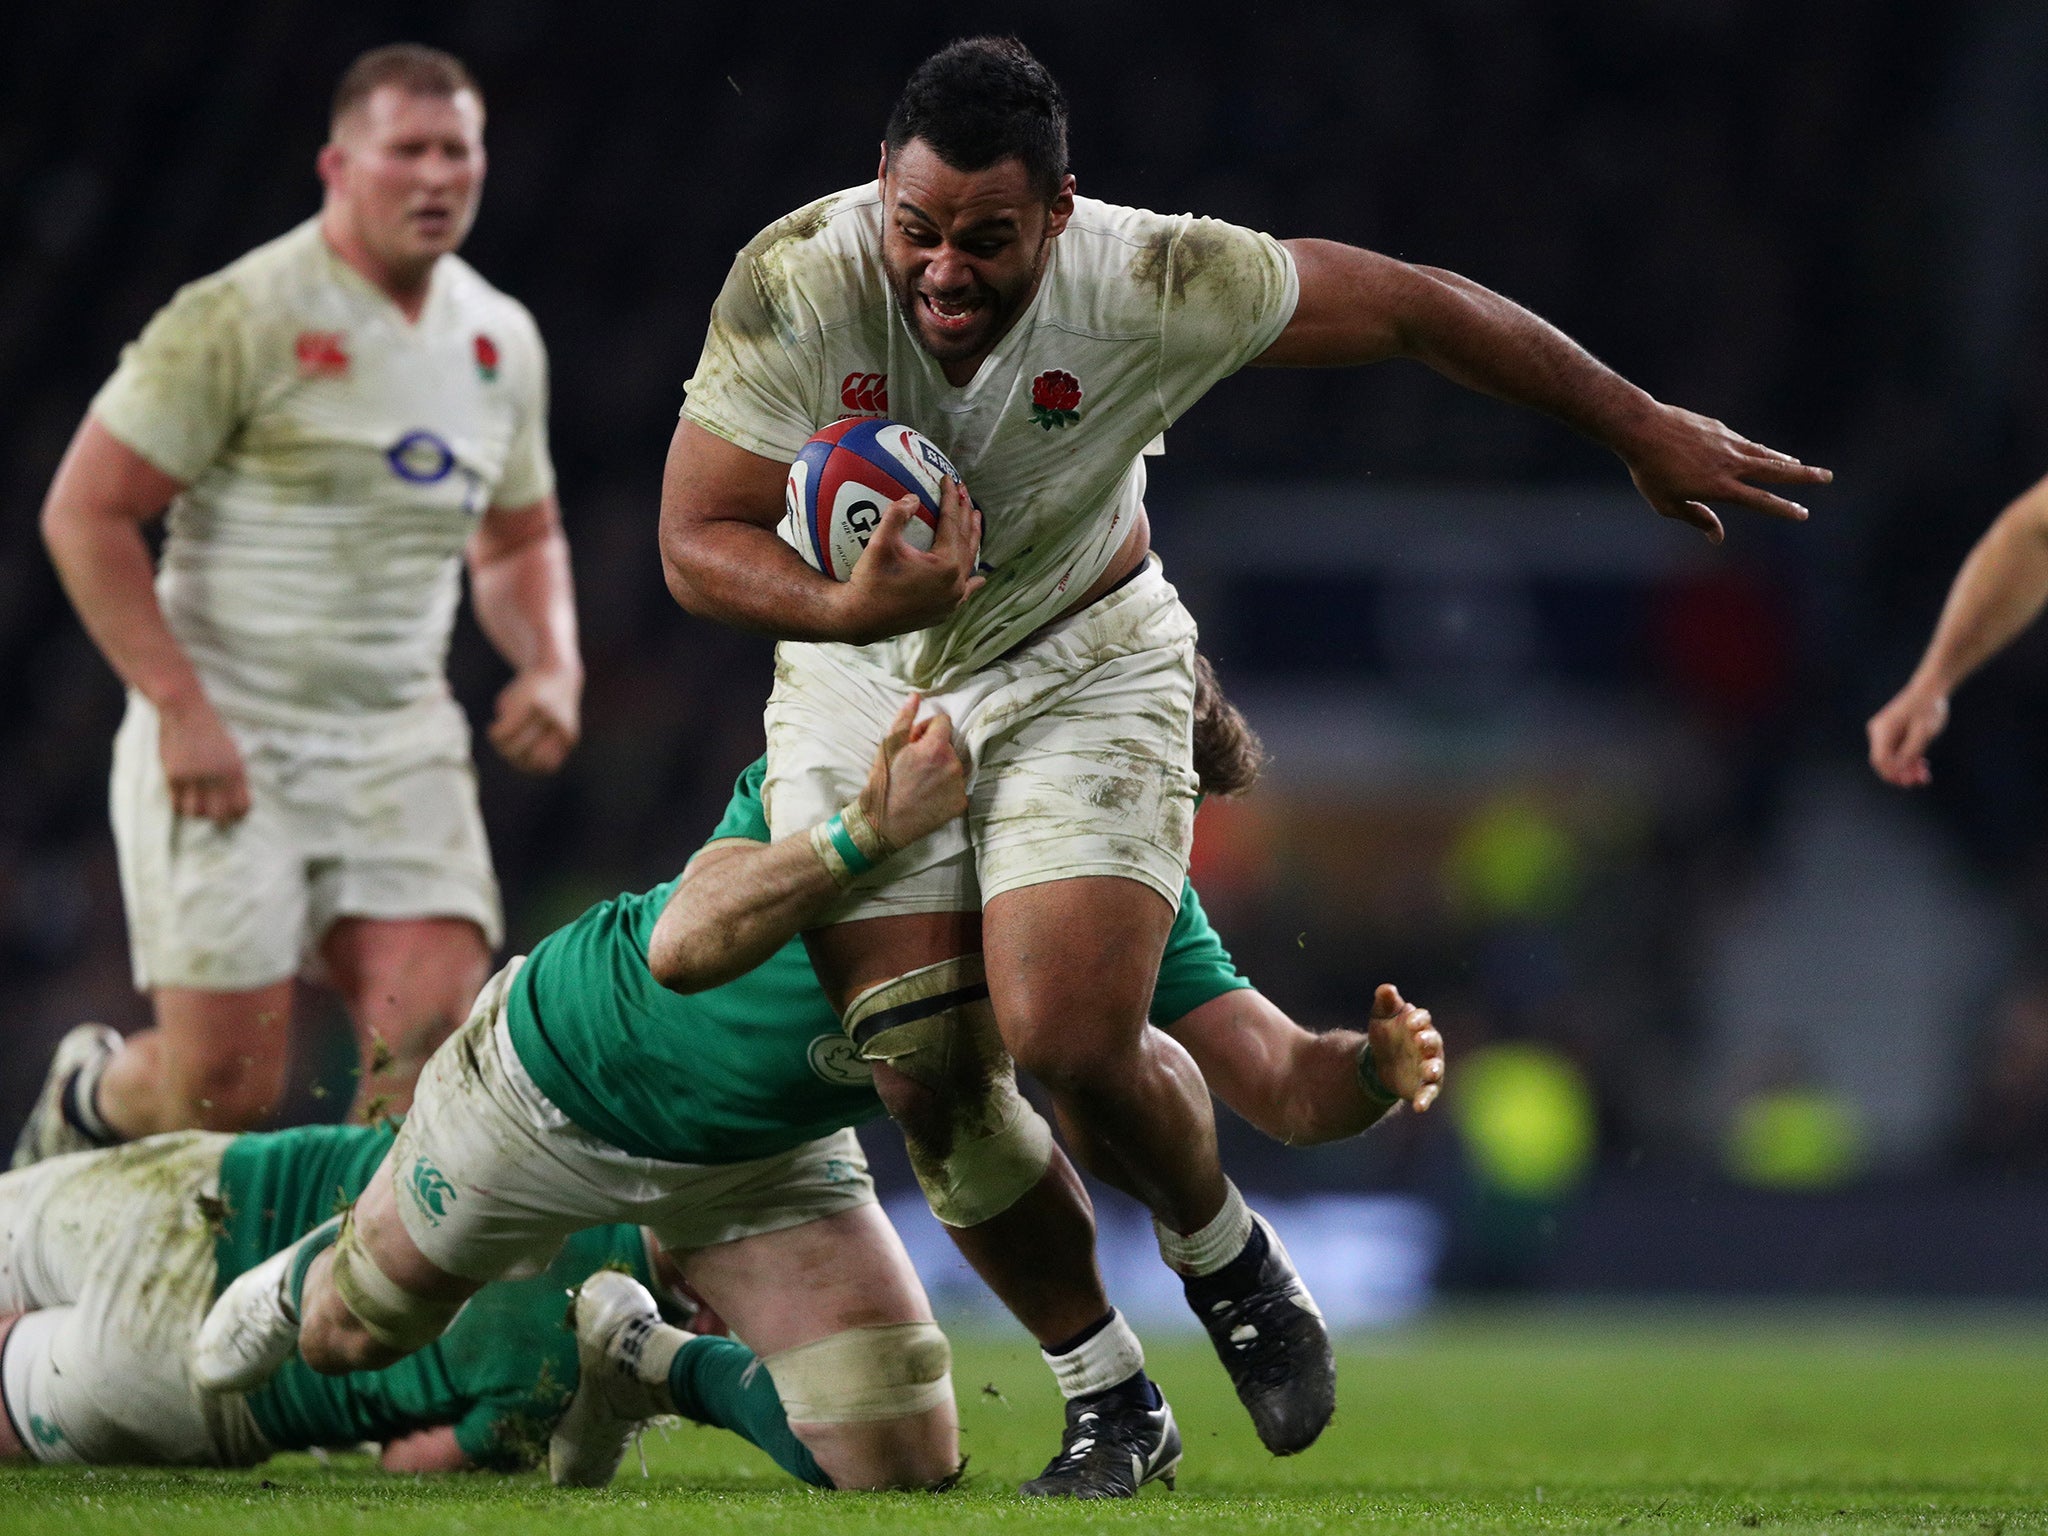 Billy Vunipola's ball carrying has been a strong feature of the tournament